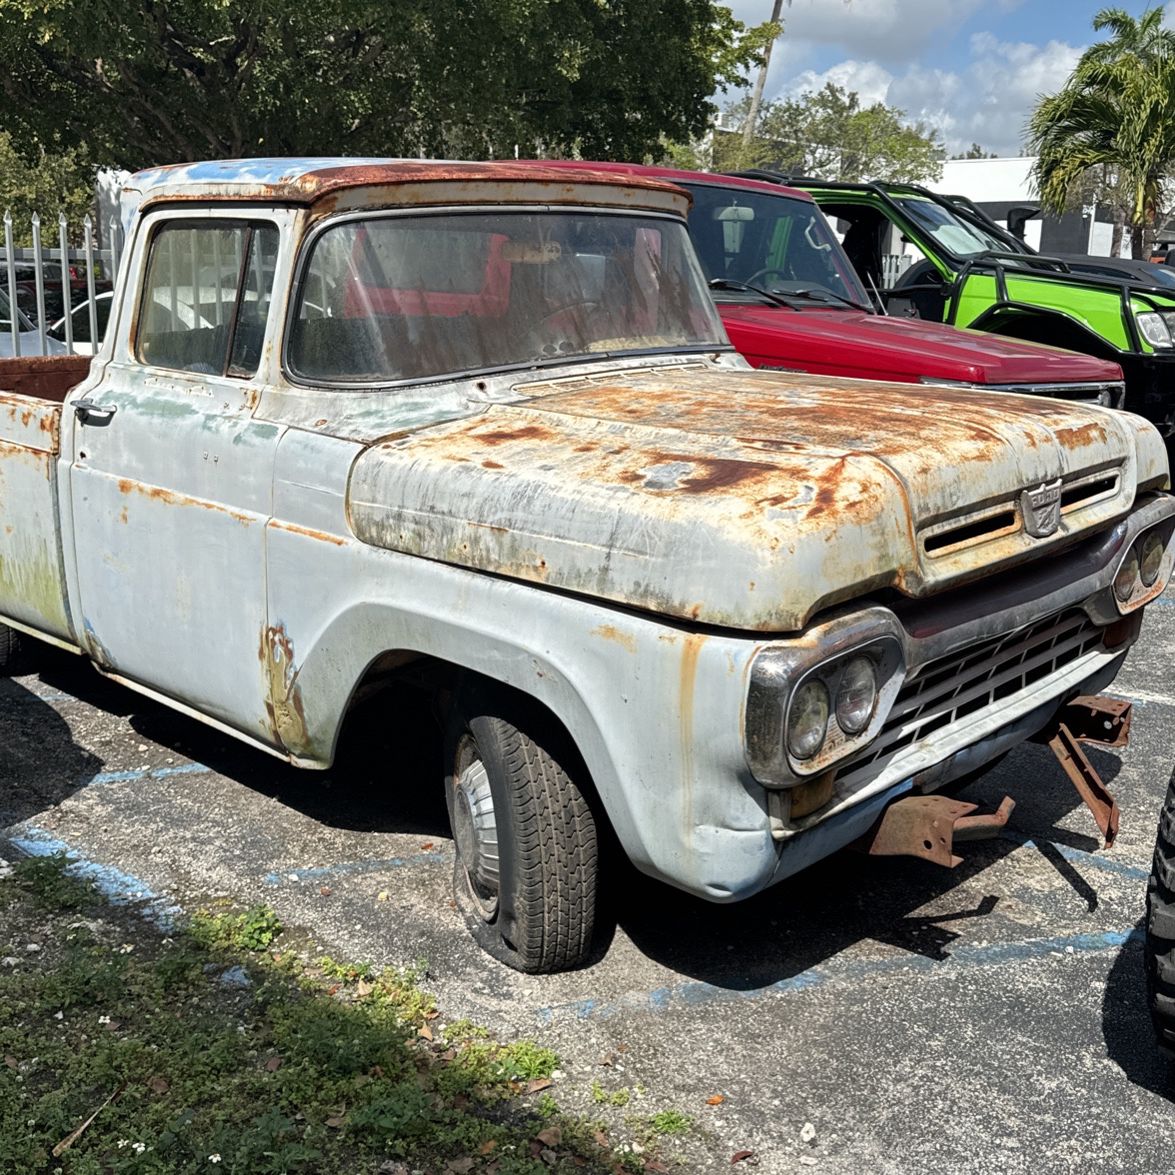 Revive a Legend: 1960 Ford F100 Short Bed Project Truck - Rare Curved Rear Window Edition!